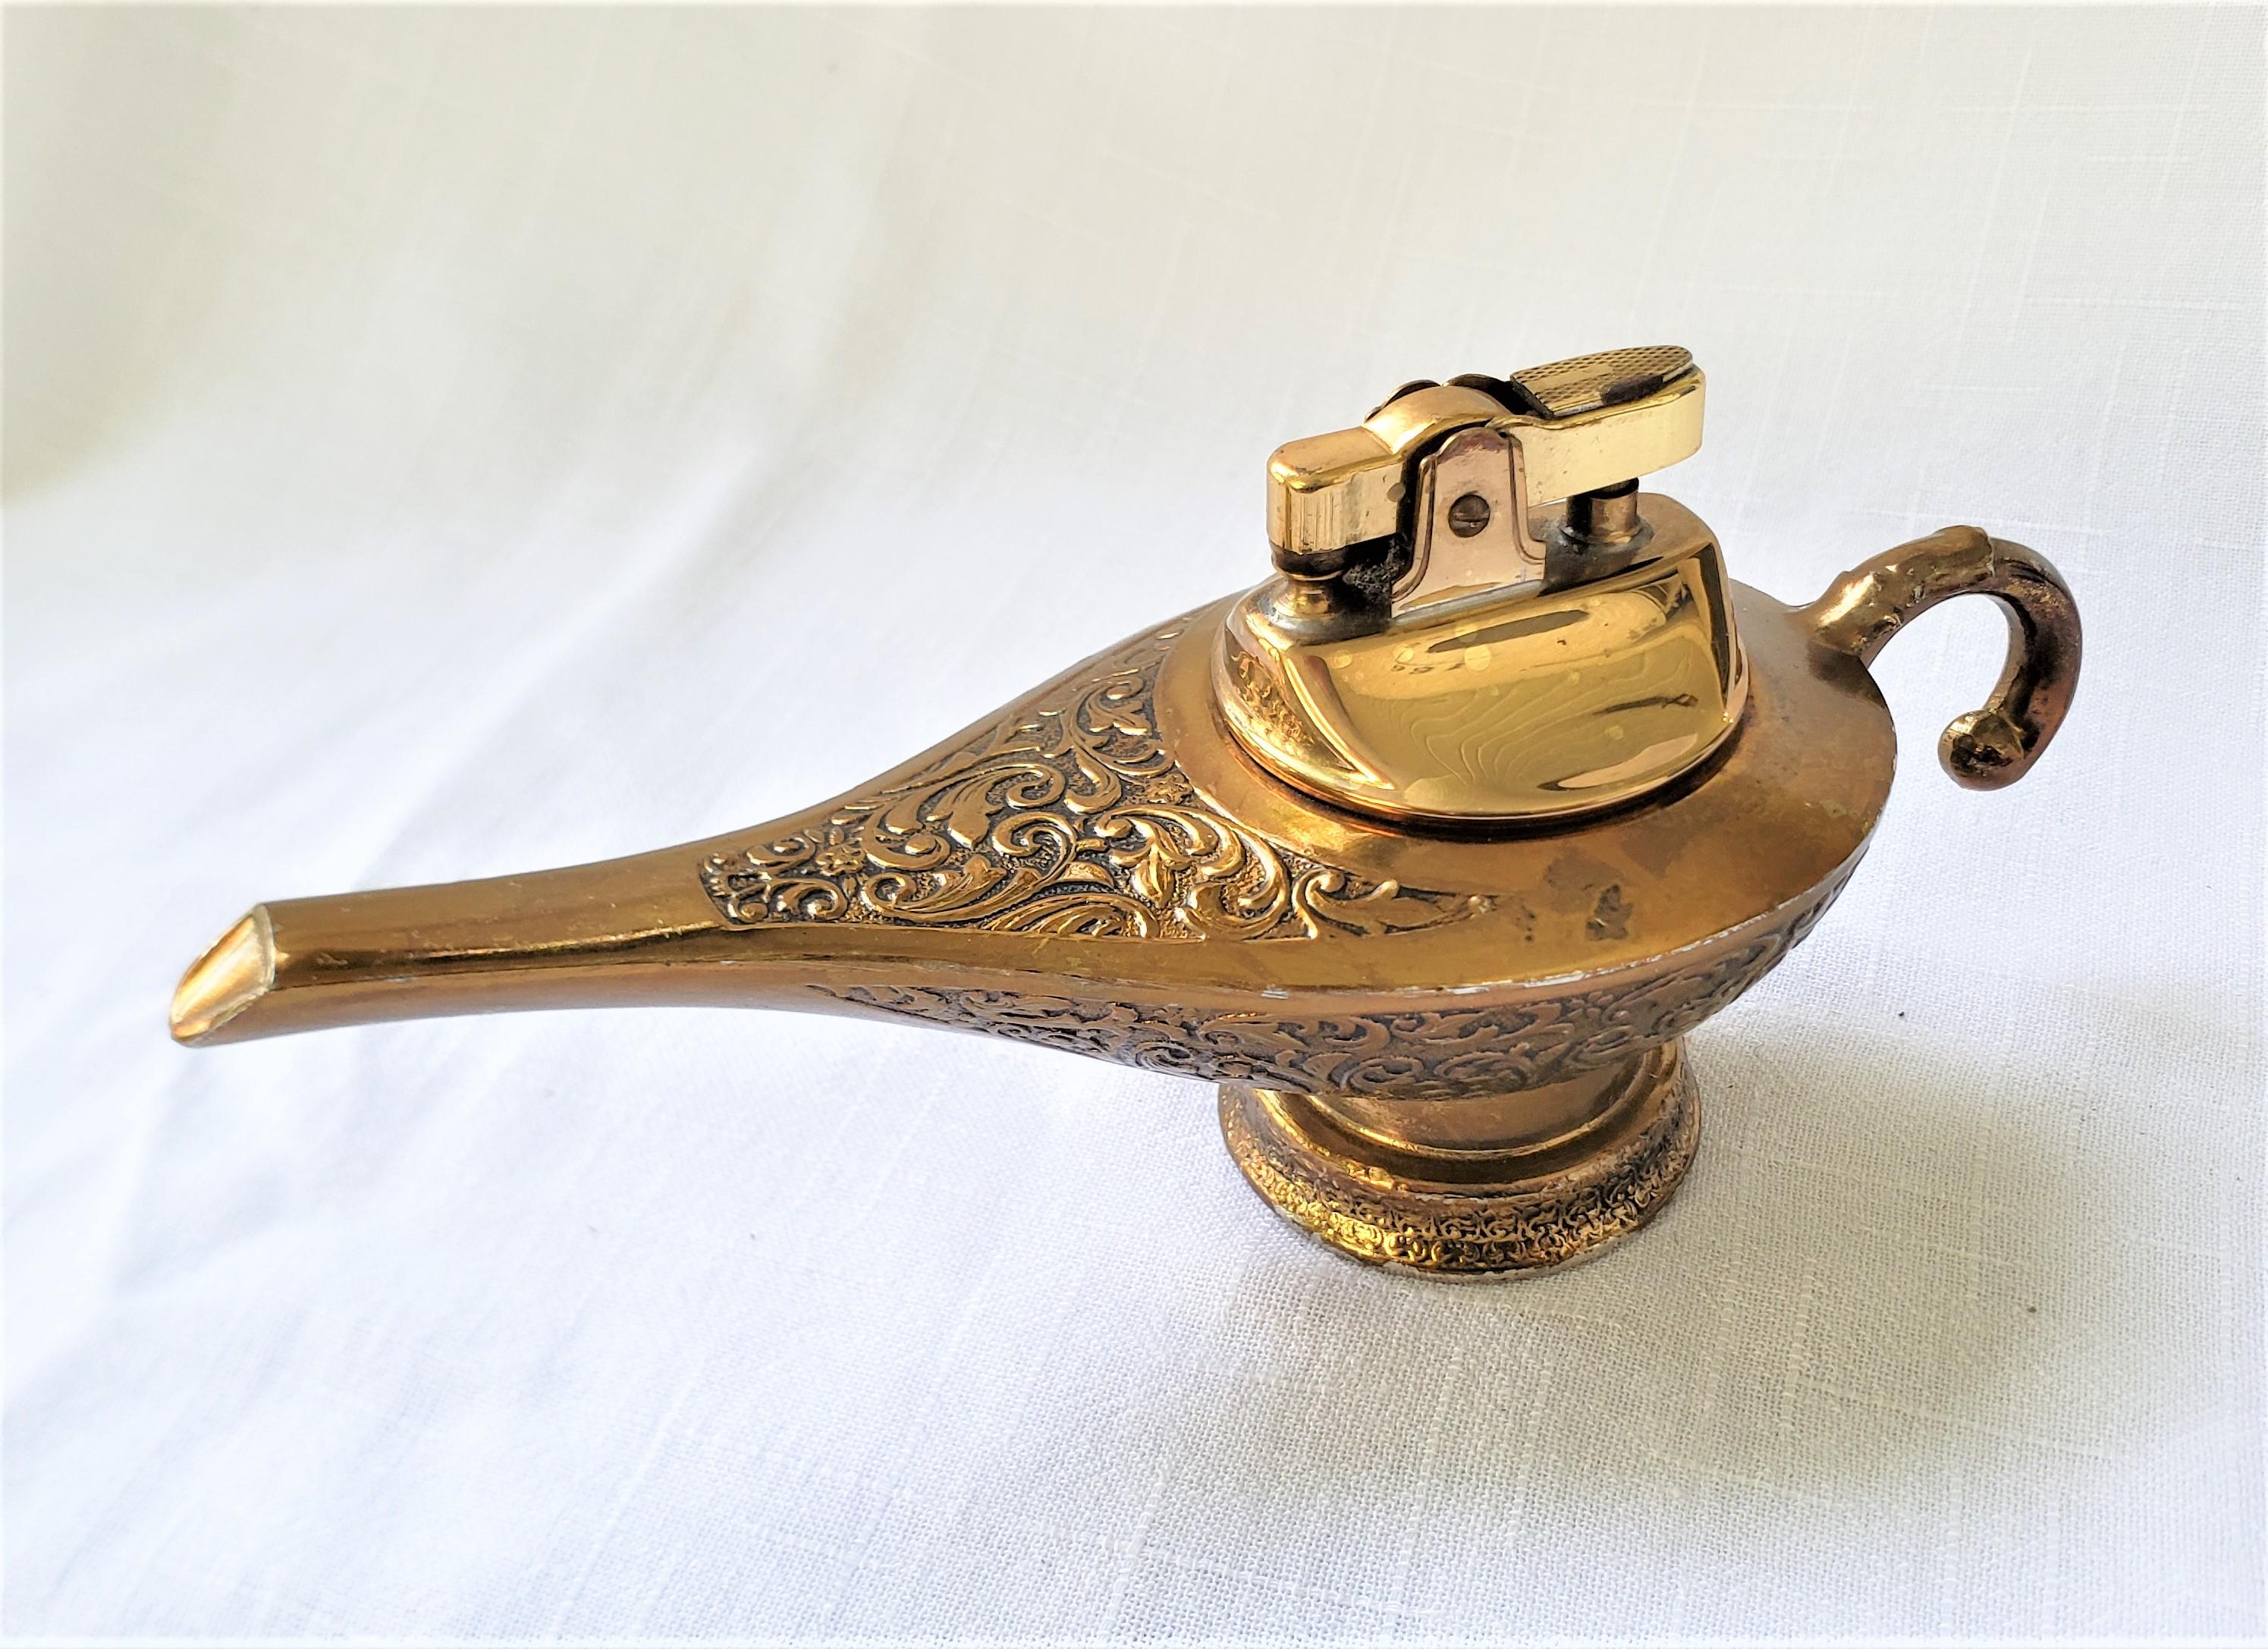 This vintage figural oil lamp table lighter is unsigned, but presumed to have originated from Japan and date to approximately 1965 and done in the period Mid-Century Modern style. The base of the lighter is composed of cast spelter with a brass